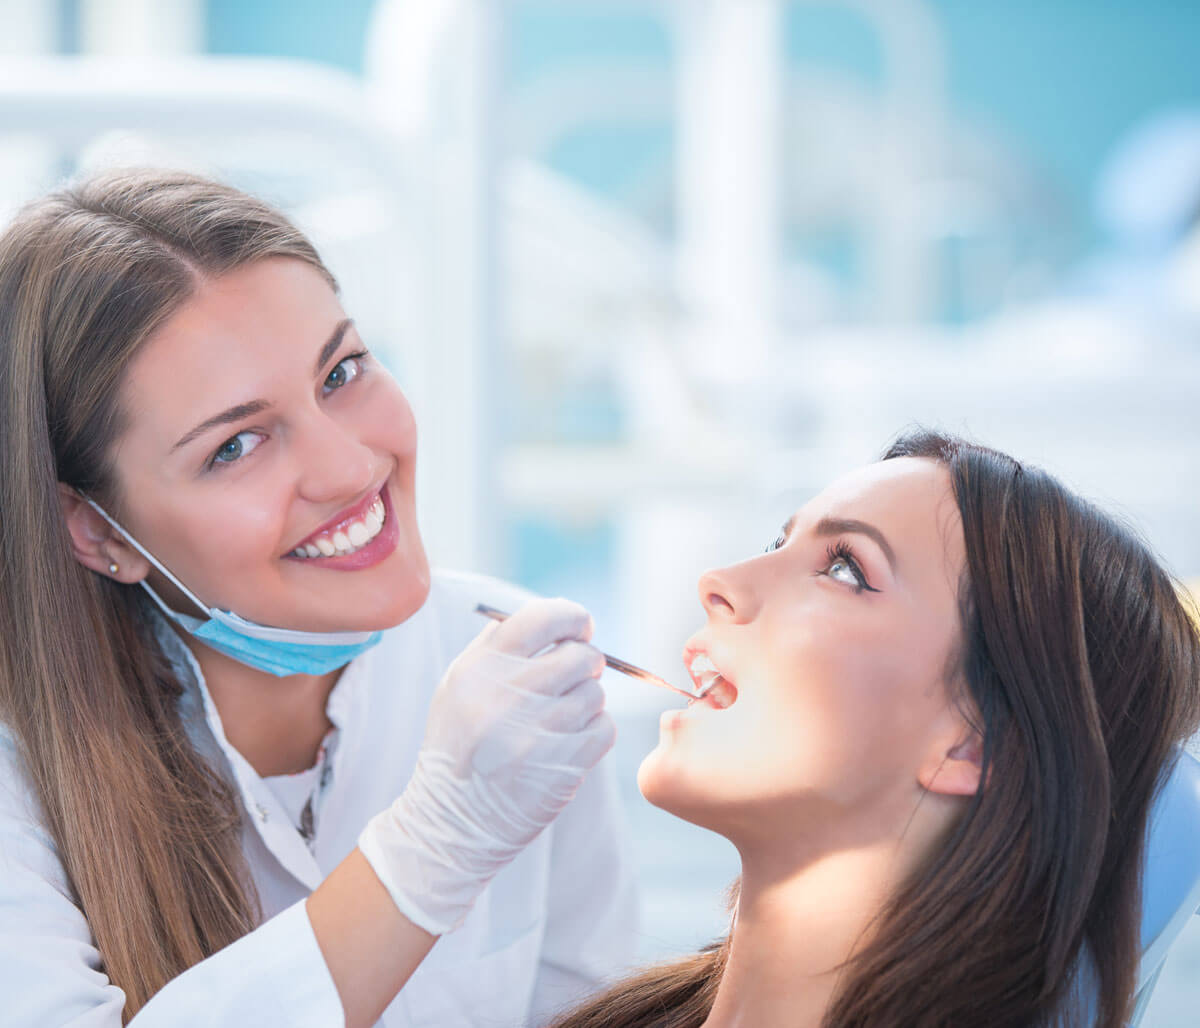 Save your teeth with affordable cavity fillings near Normal, IL